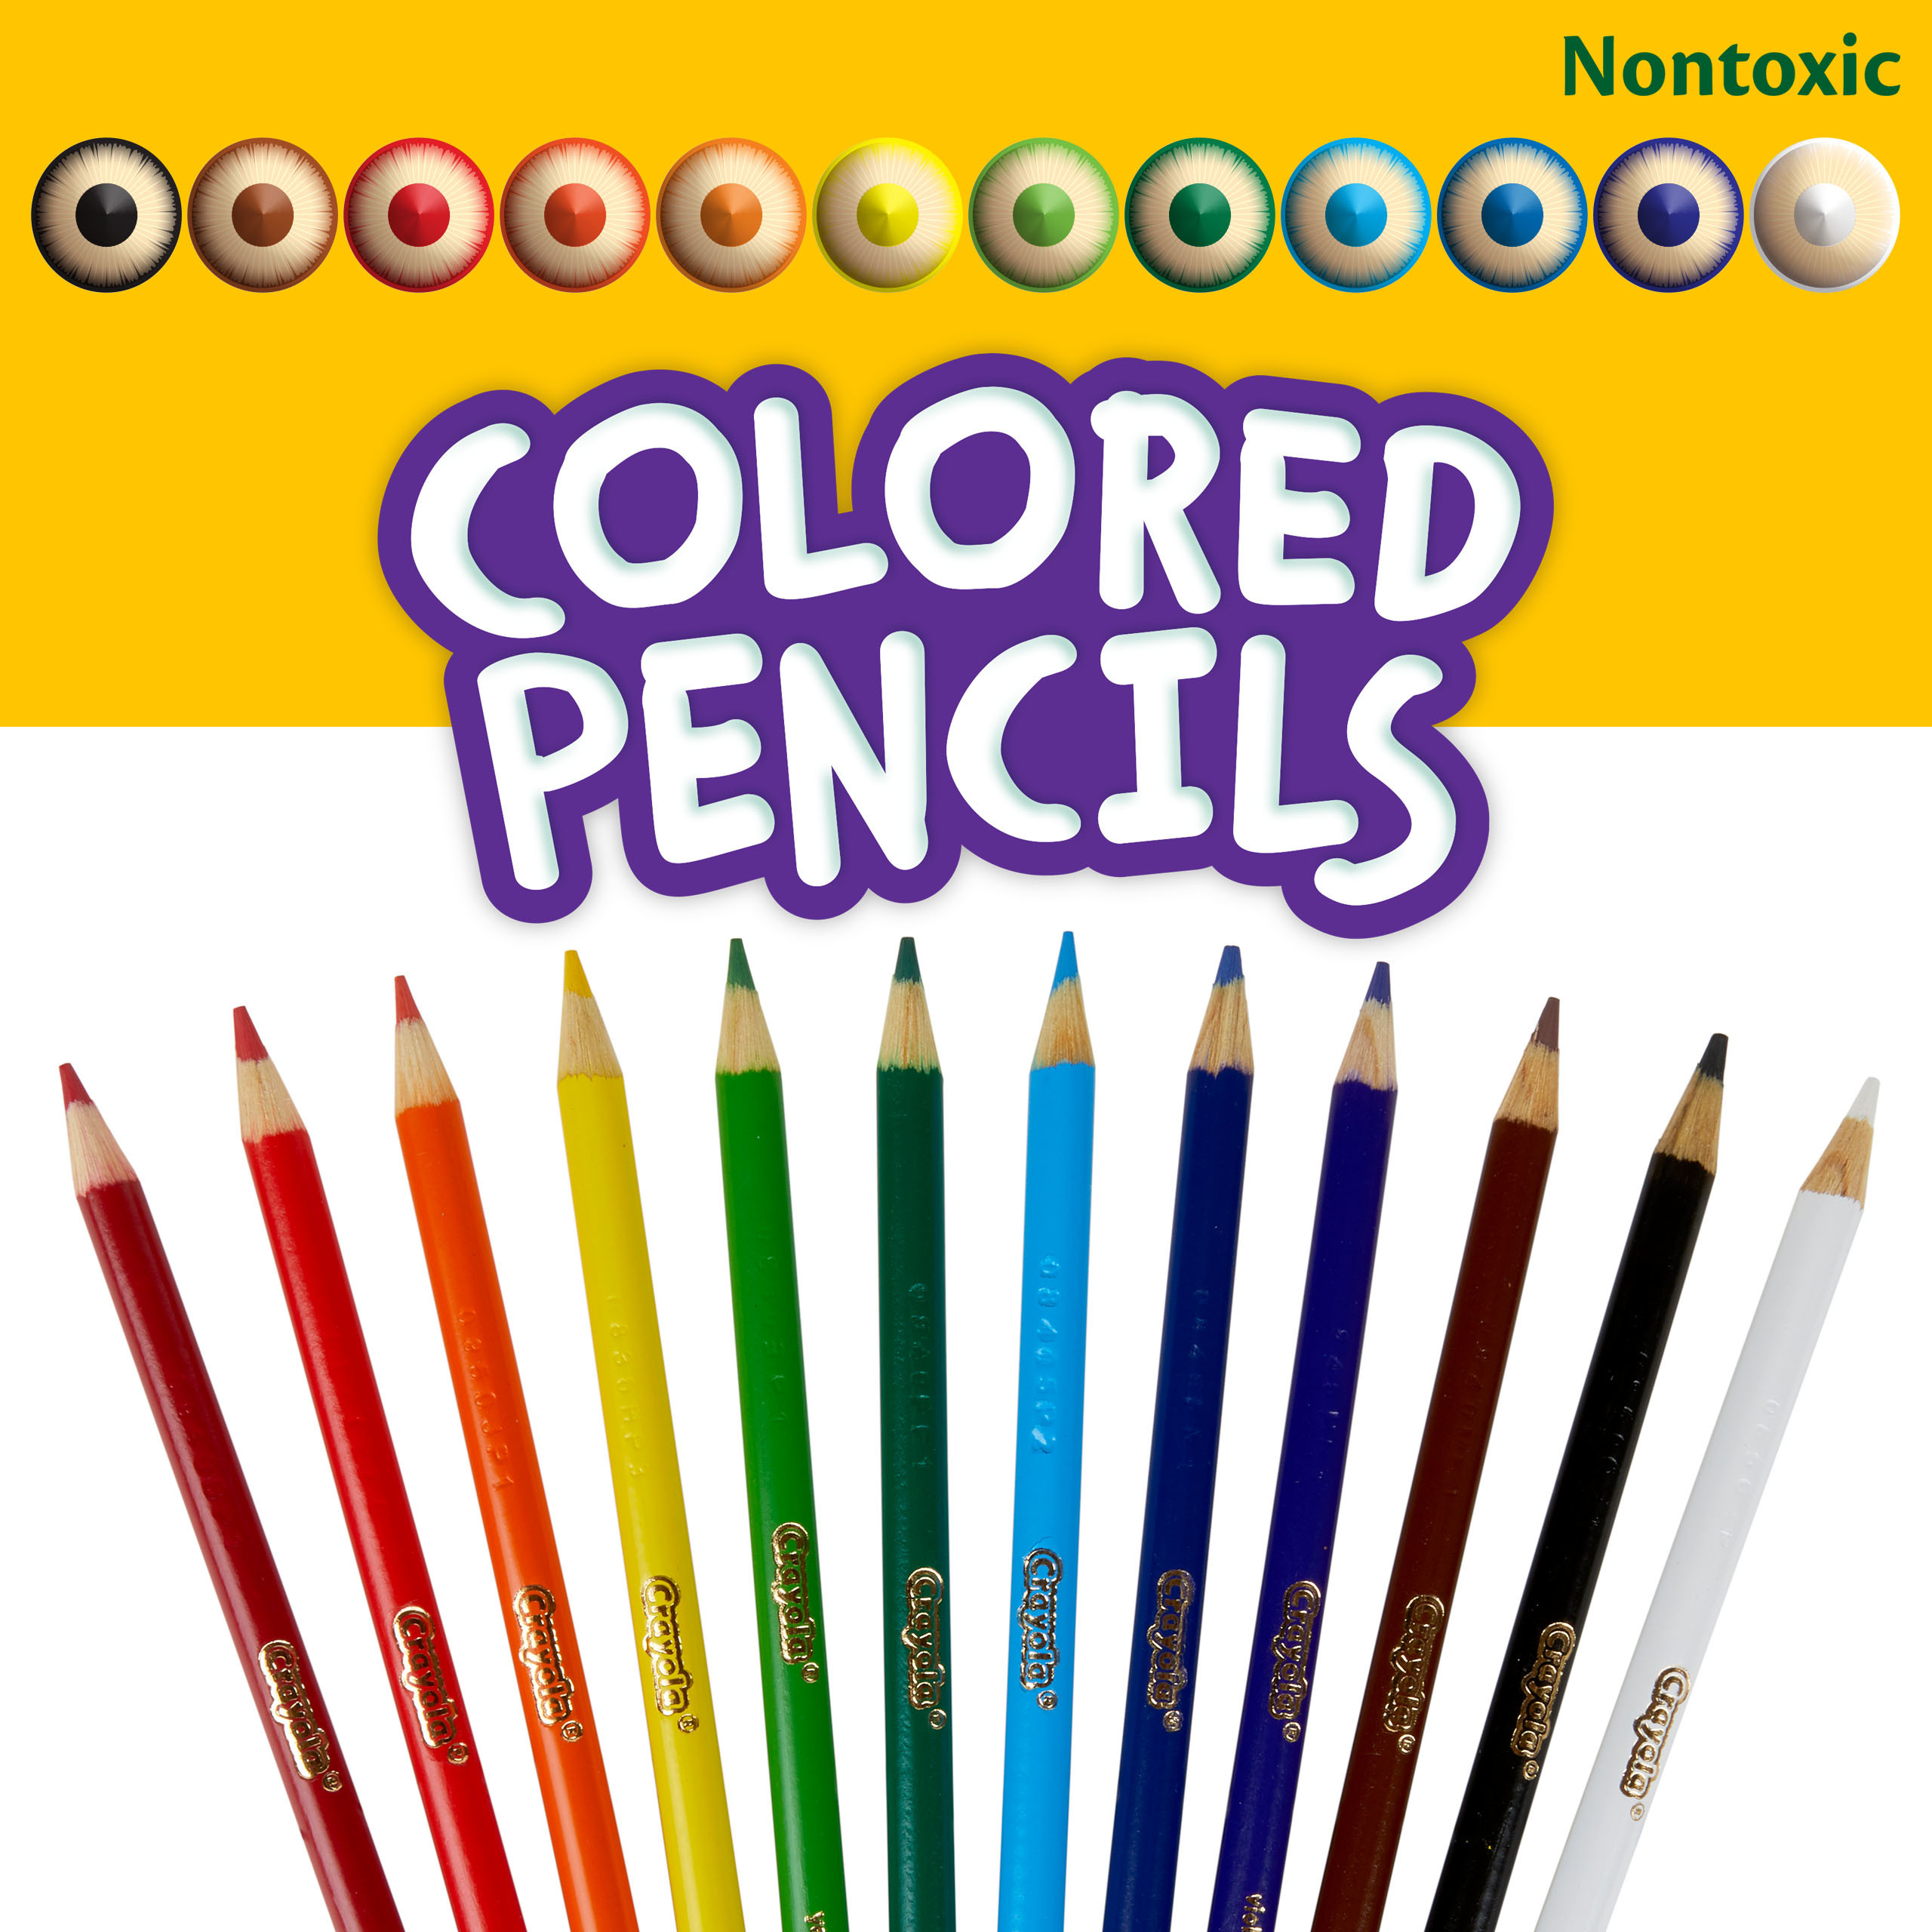 Crayola Colored Pencils, Assorted Colors, Pre-sharpened, Adult Coloring, 12 Count - image 3 of 9